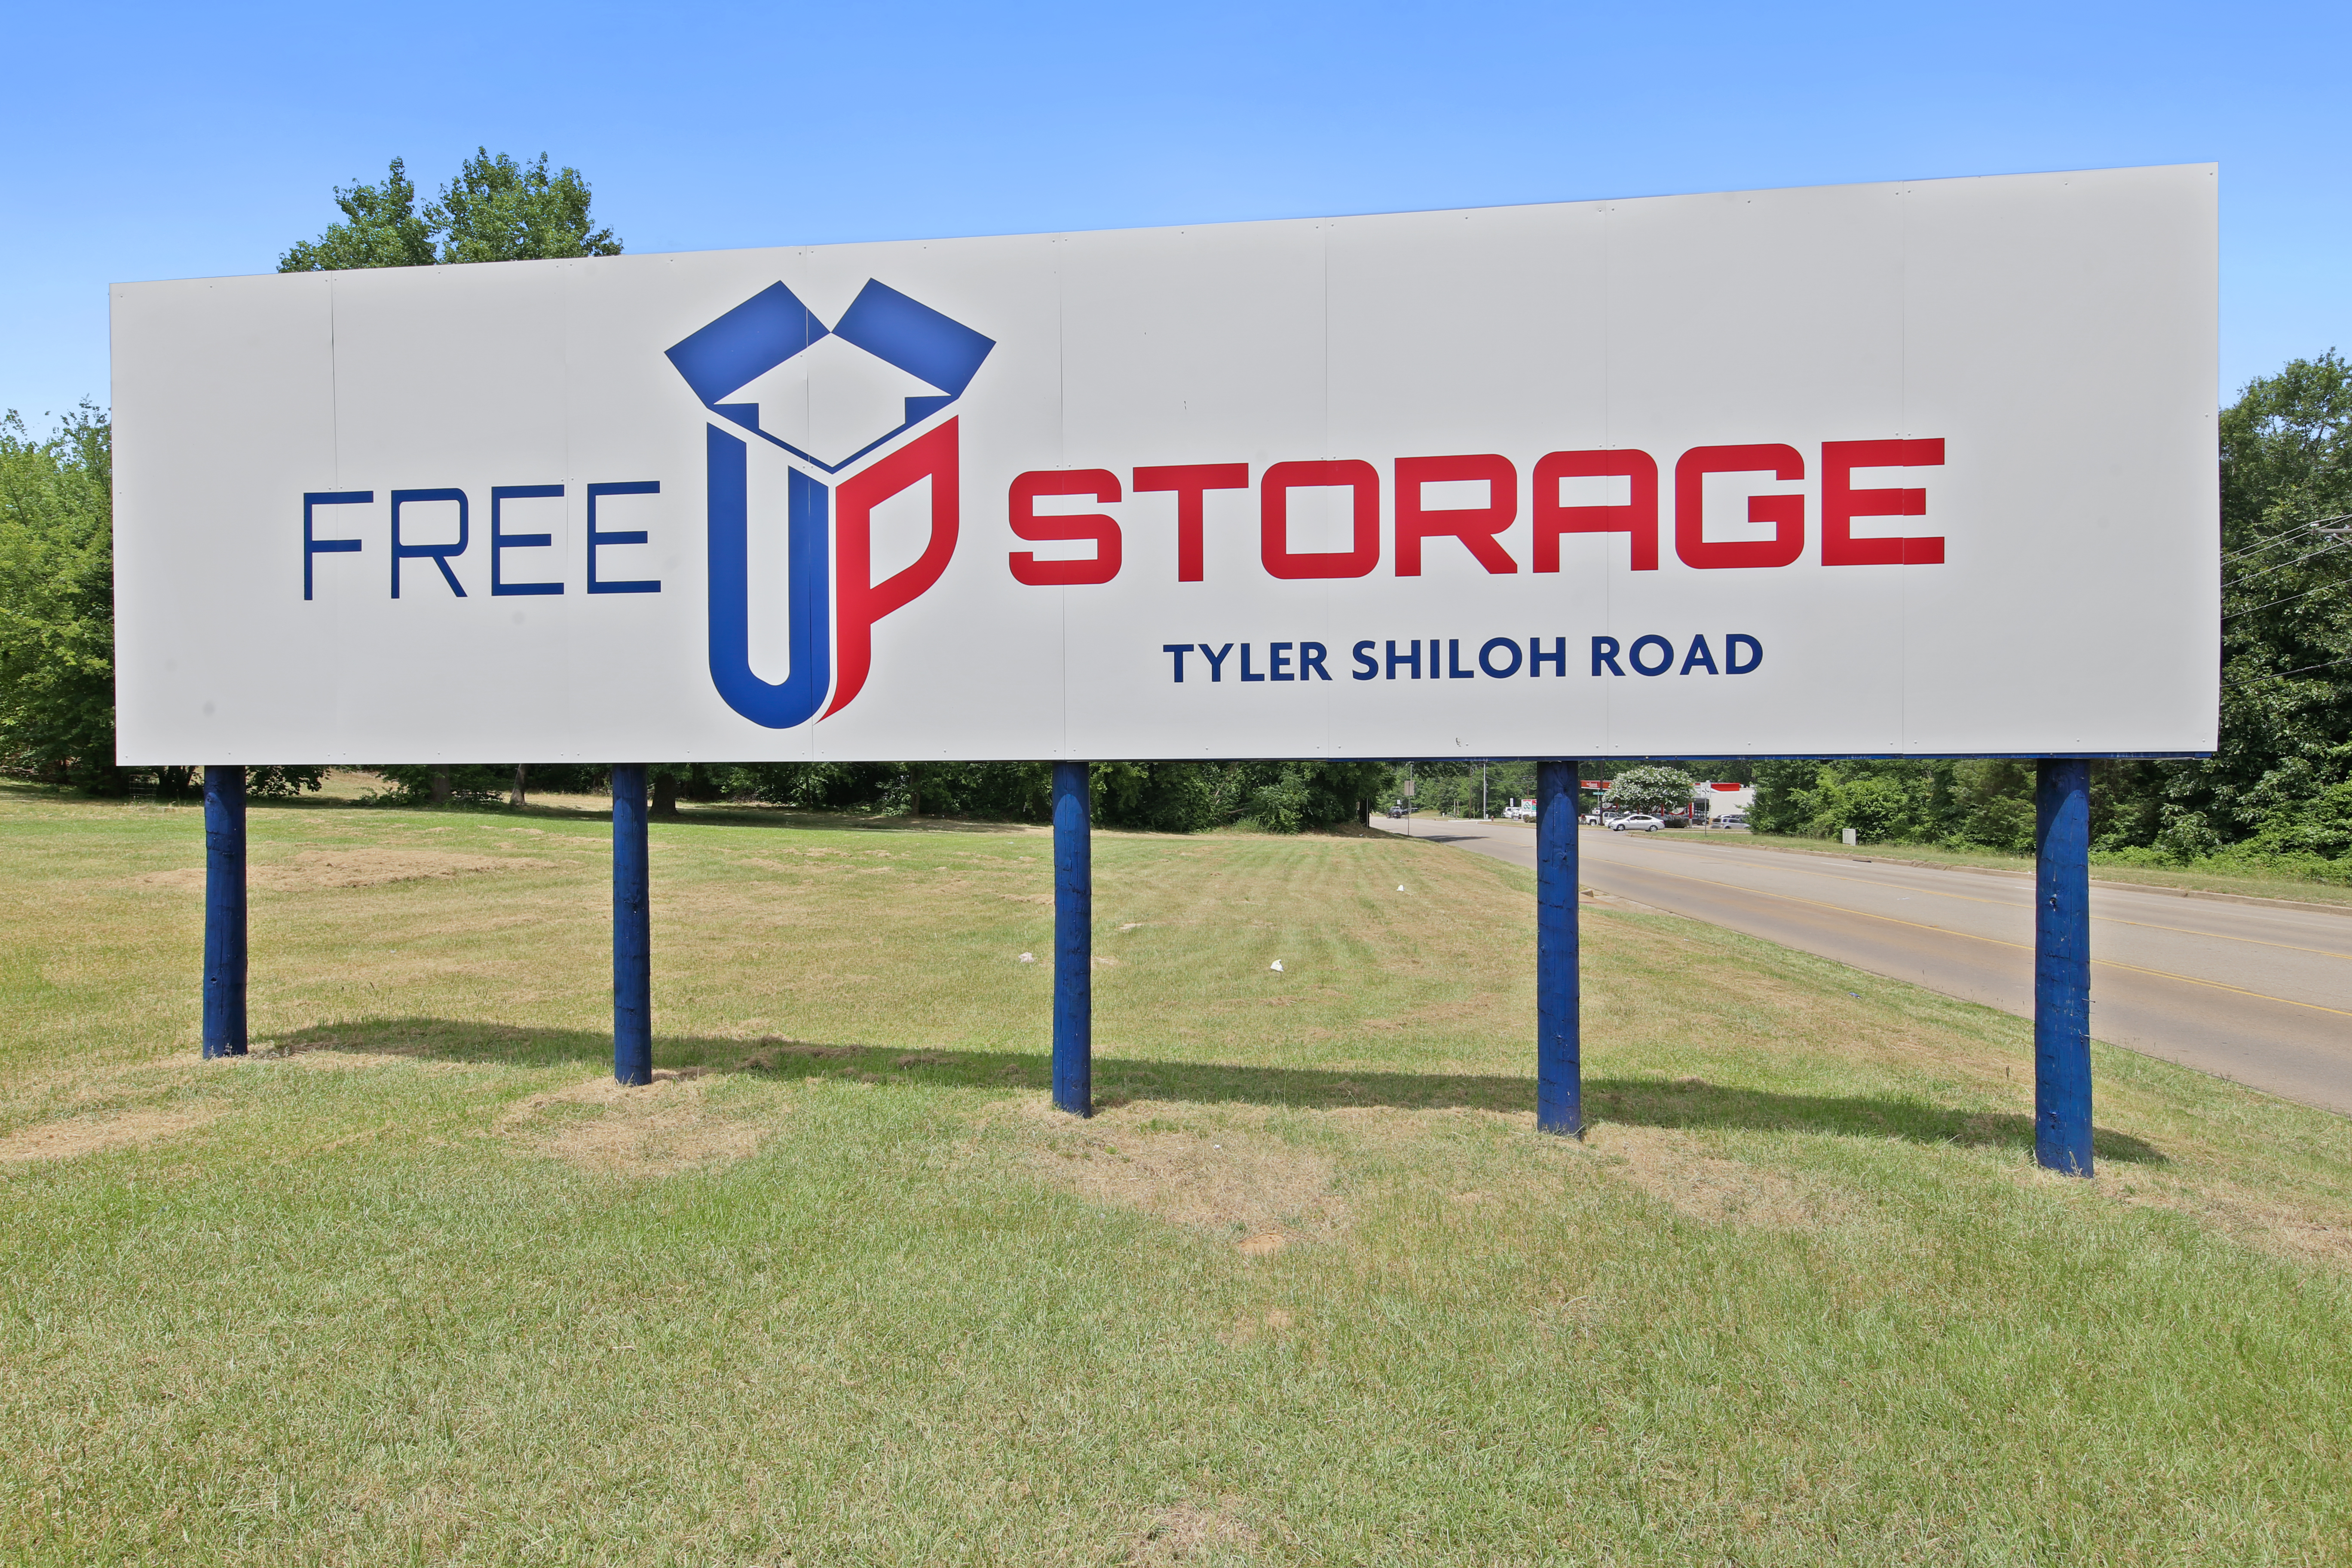 FreeUp Storage Tyler Shiloh Road Sign